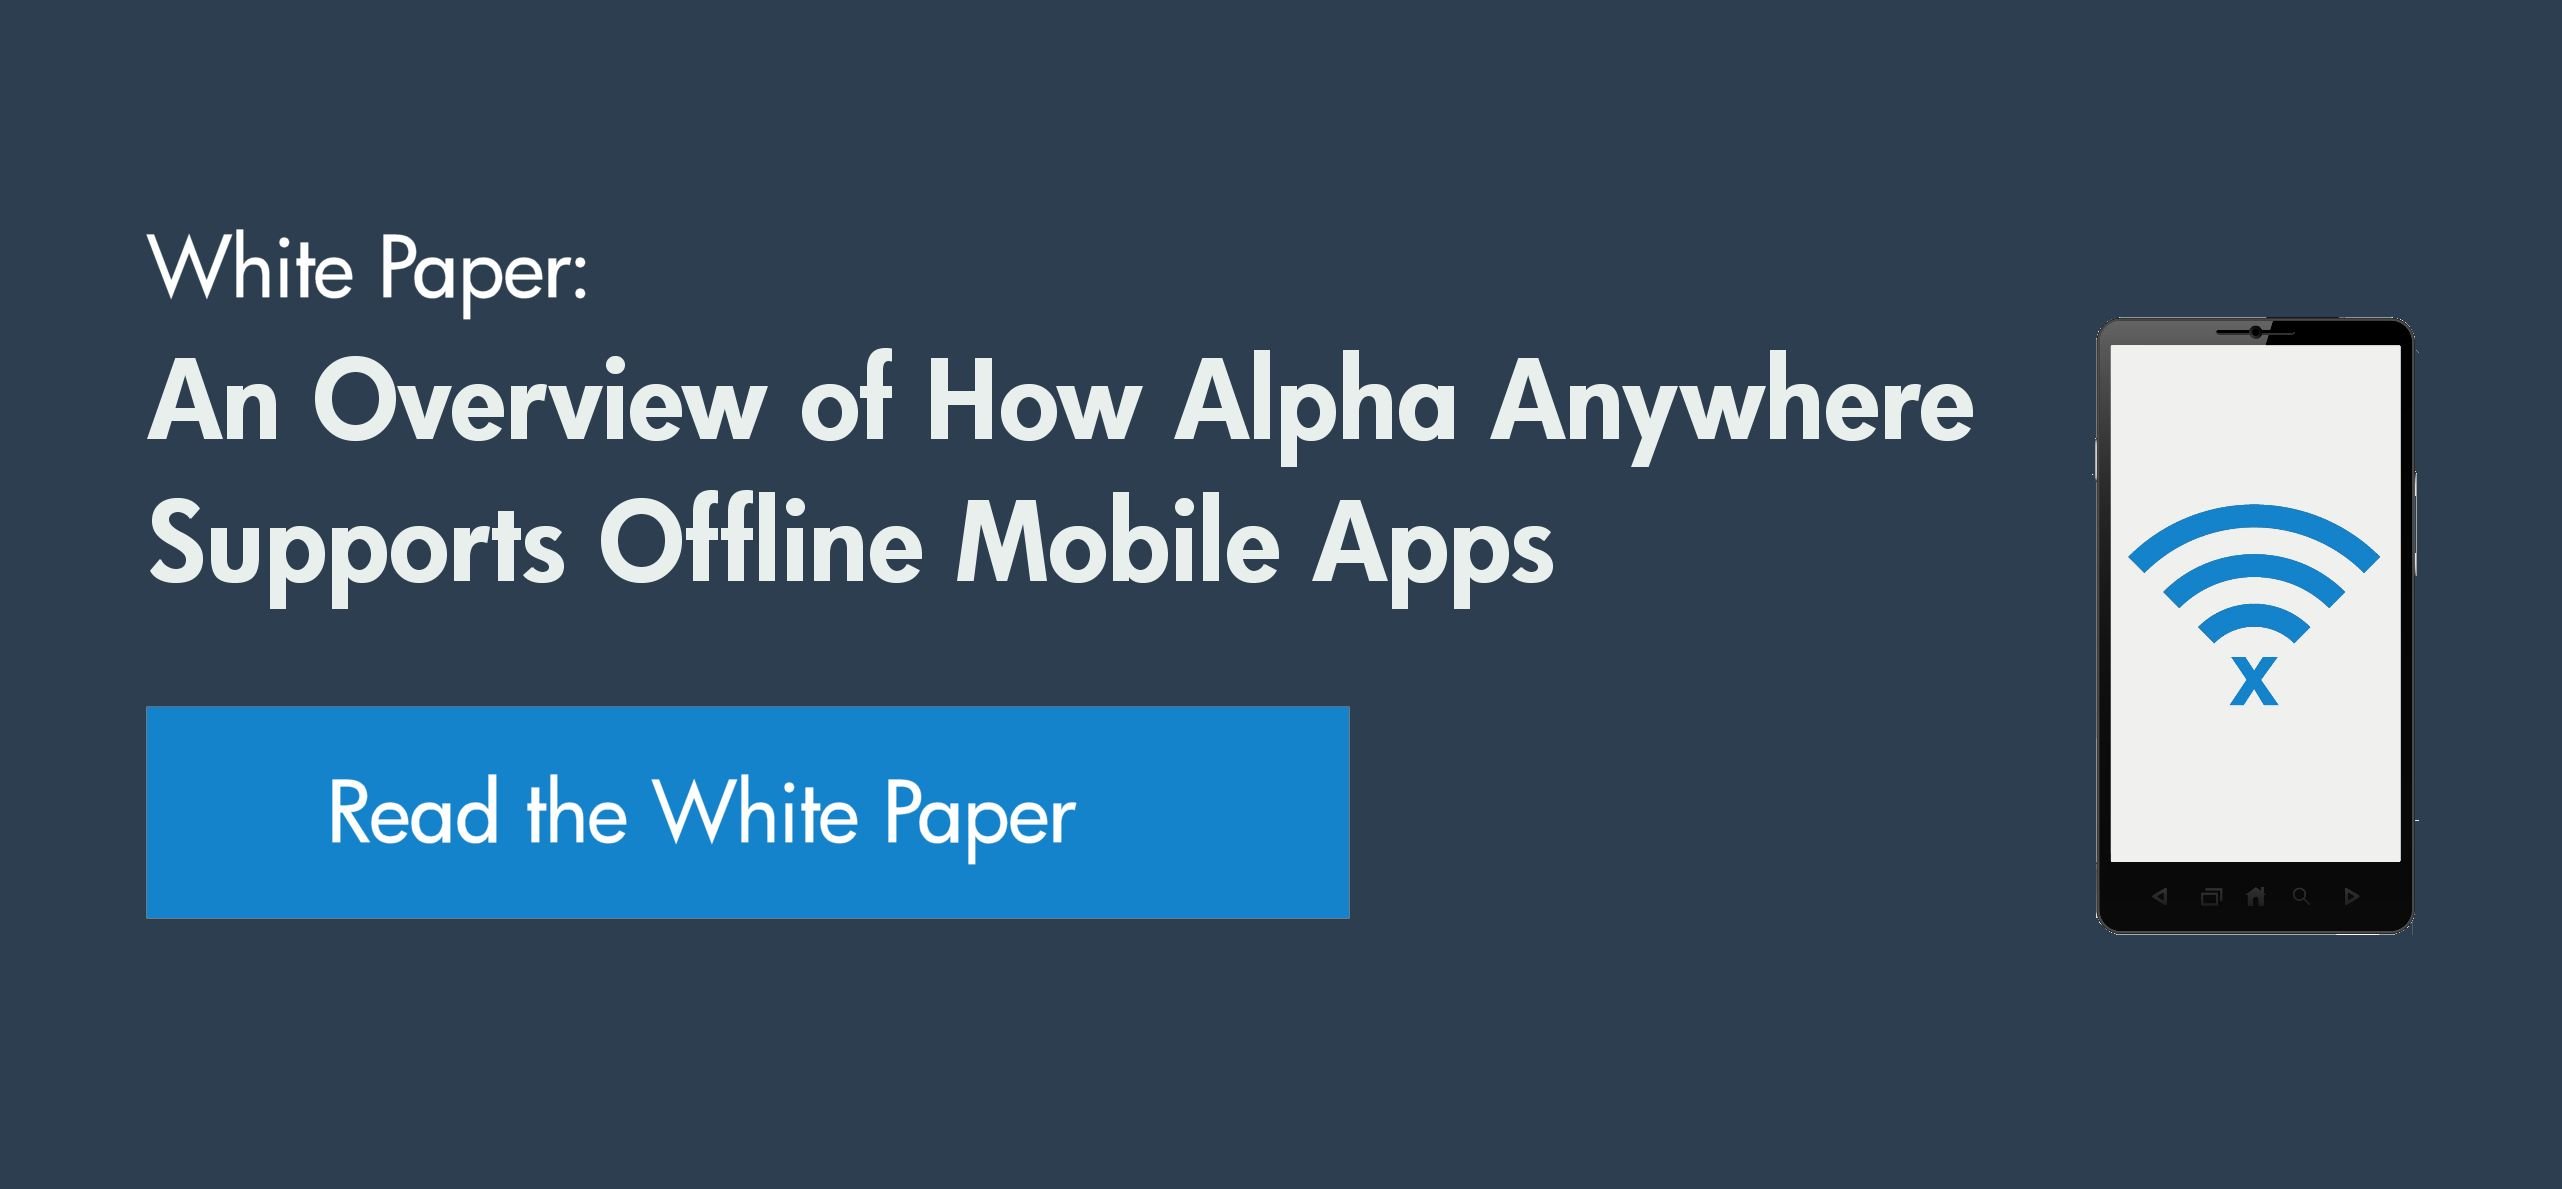 You need to be building offline web apps